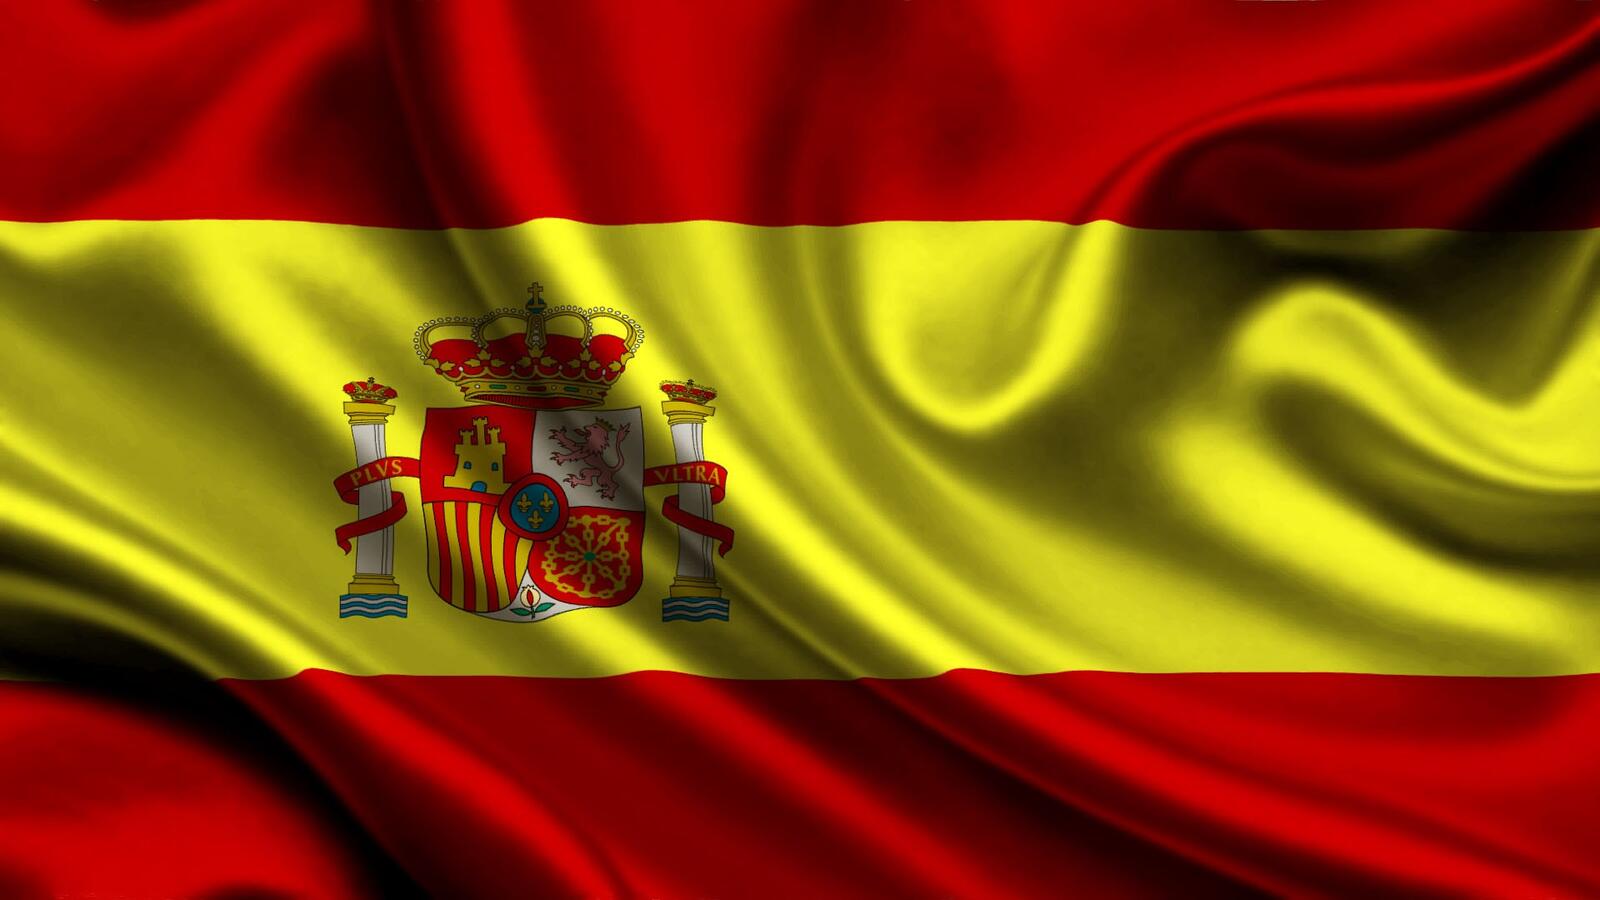 Wallpapers Spain flag miscellaneous on the desktop